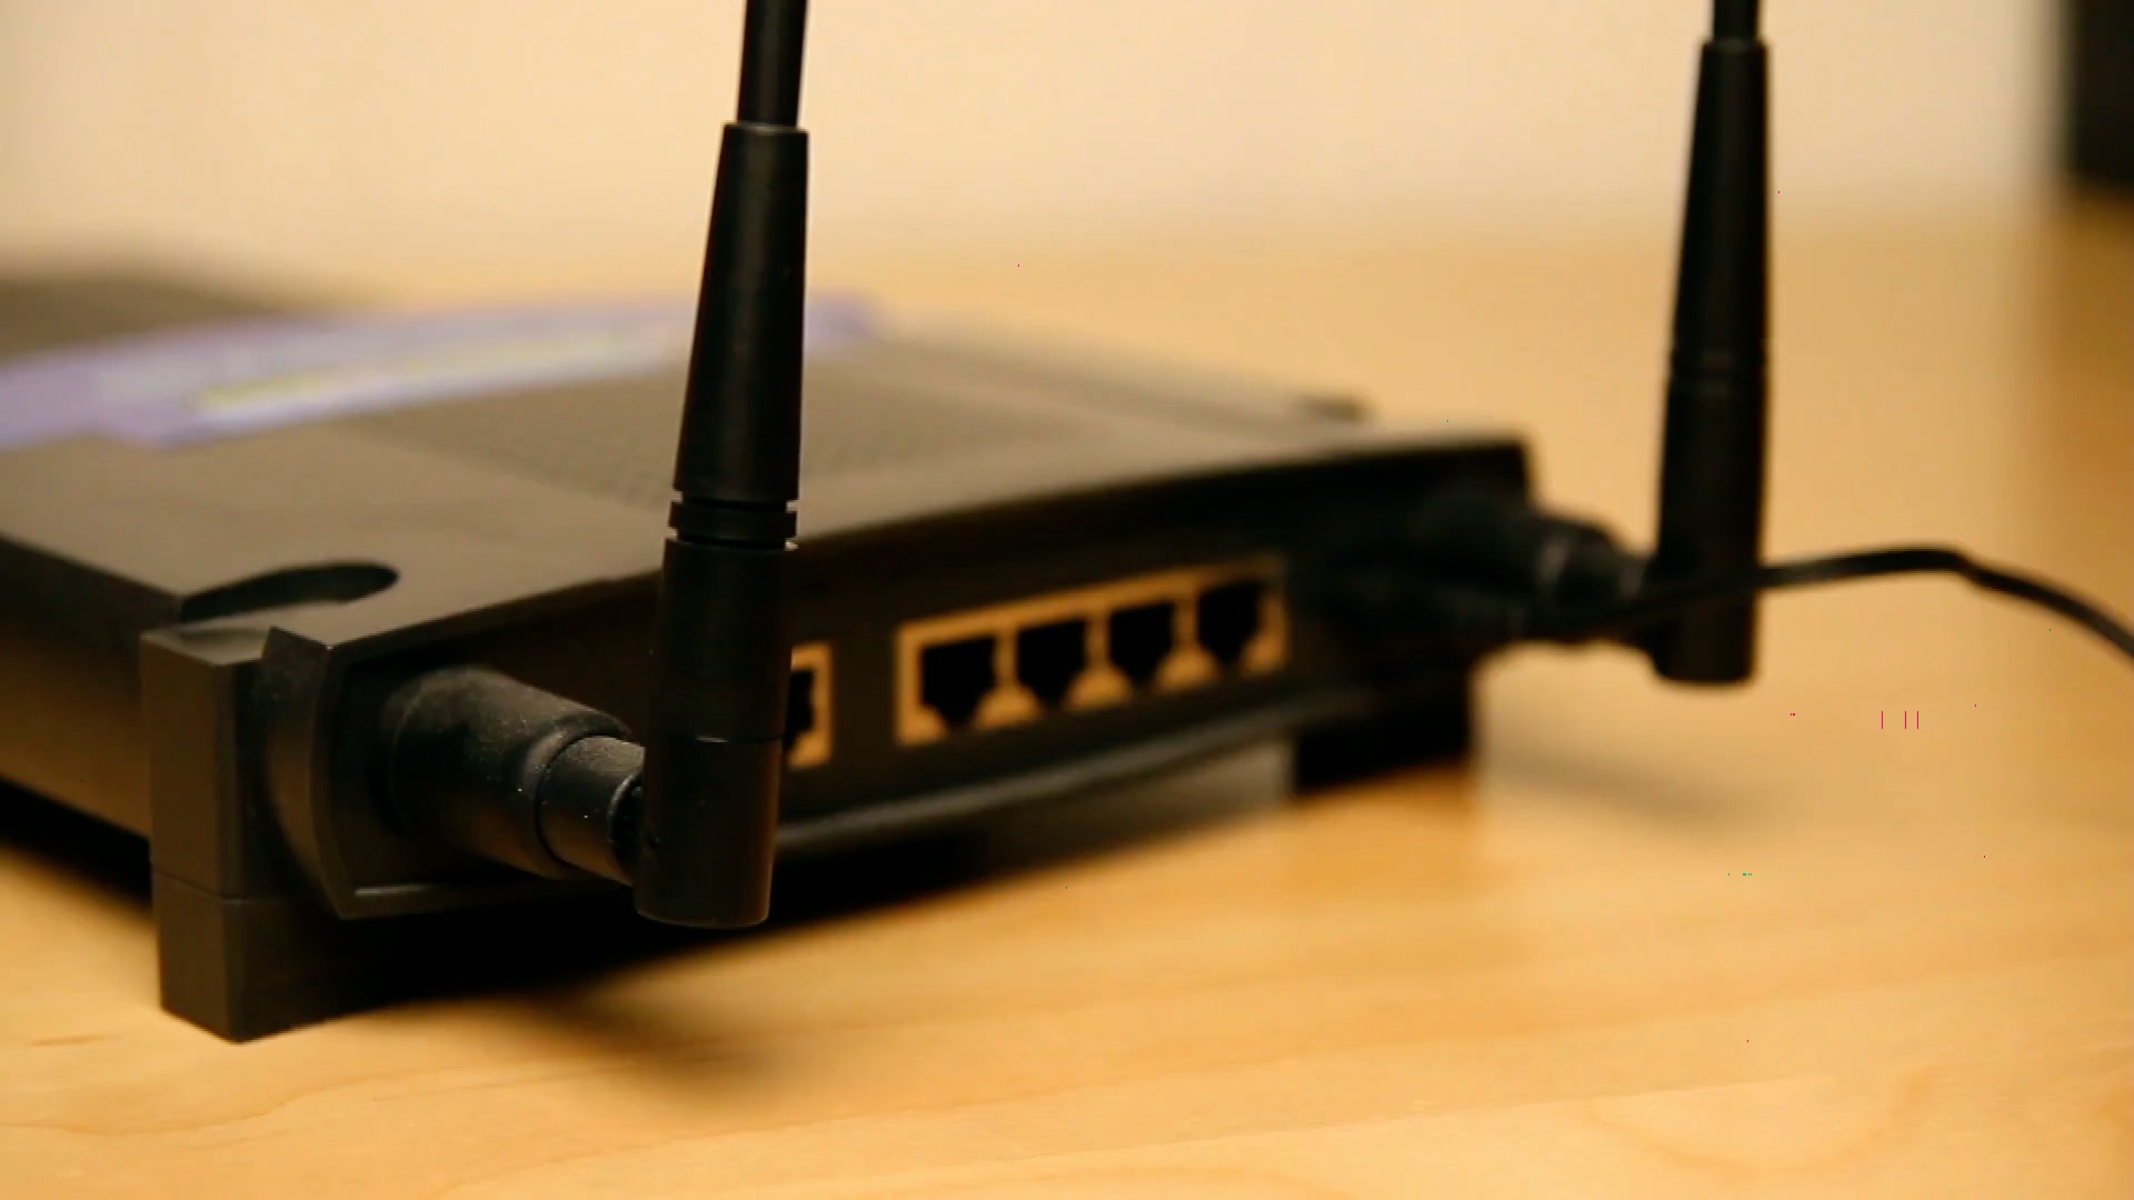 What Two Default Wireless Router Settings Can Affect Network Security